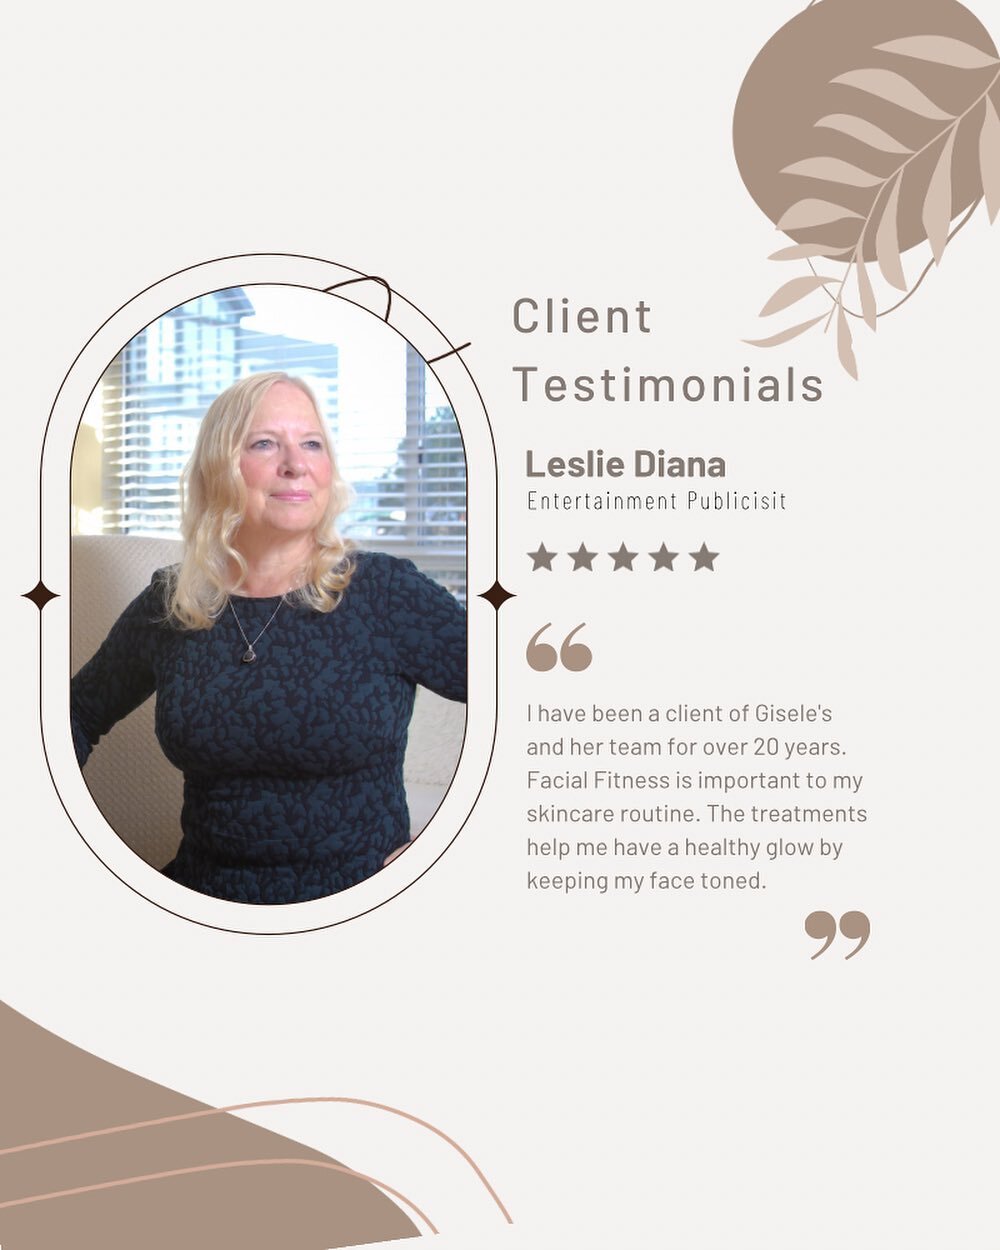 &quot;I have been a client of Gisele's and her team for over 20 years. Facial Fitness is important to my skincare routine. The treatments help me have a healthy glow by keeping my face toned. I credit the compliments I get on my complexion to Facial 